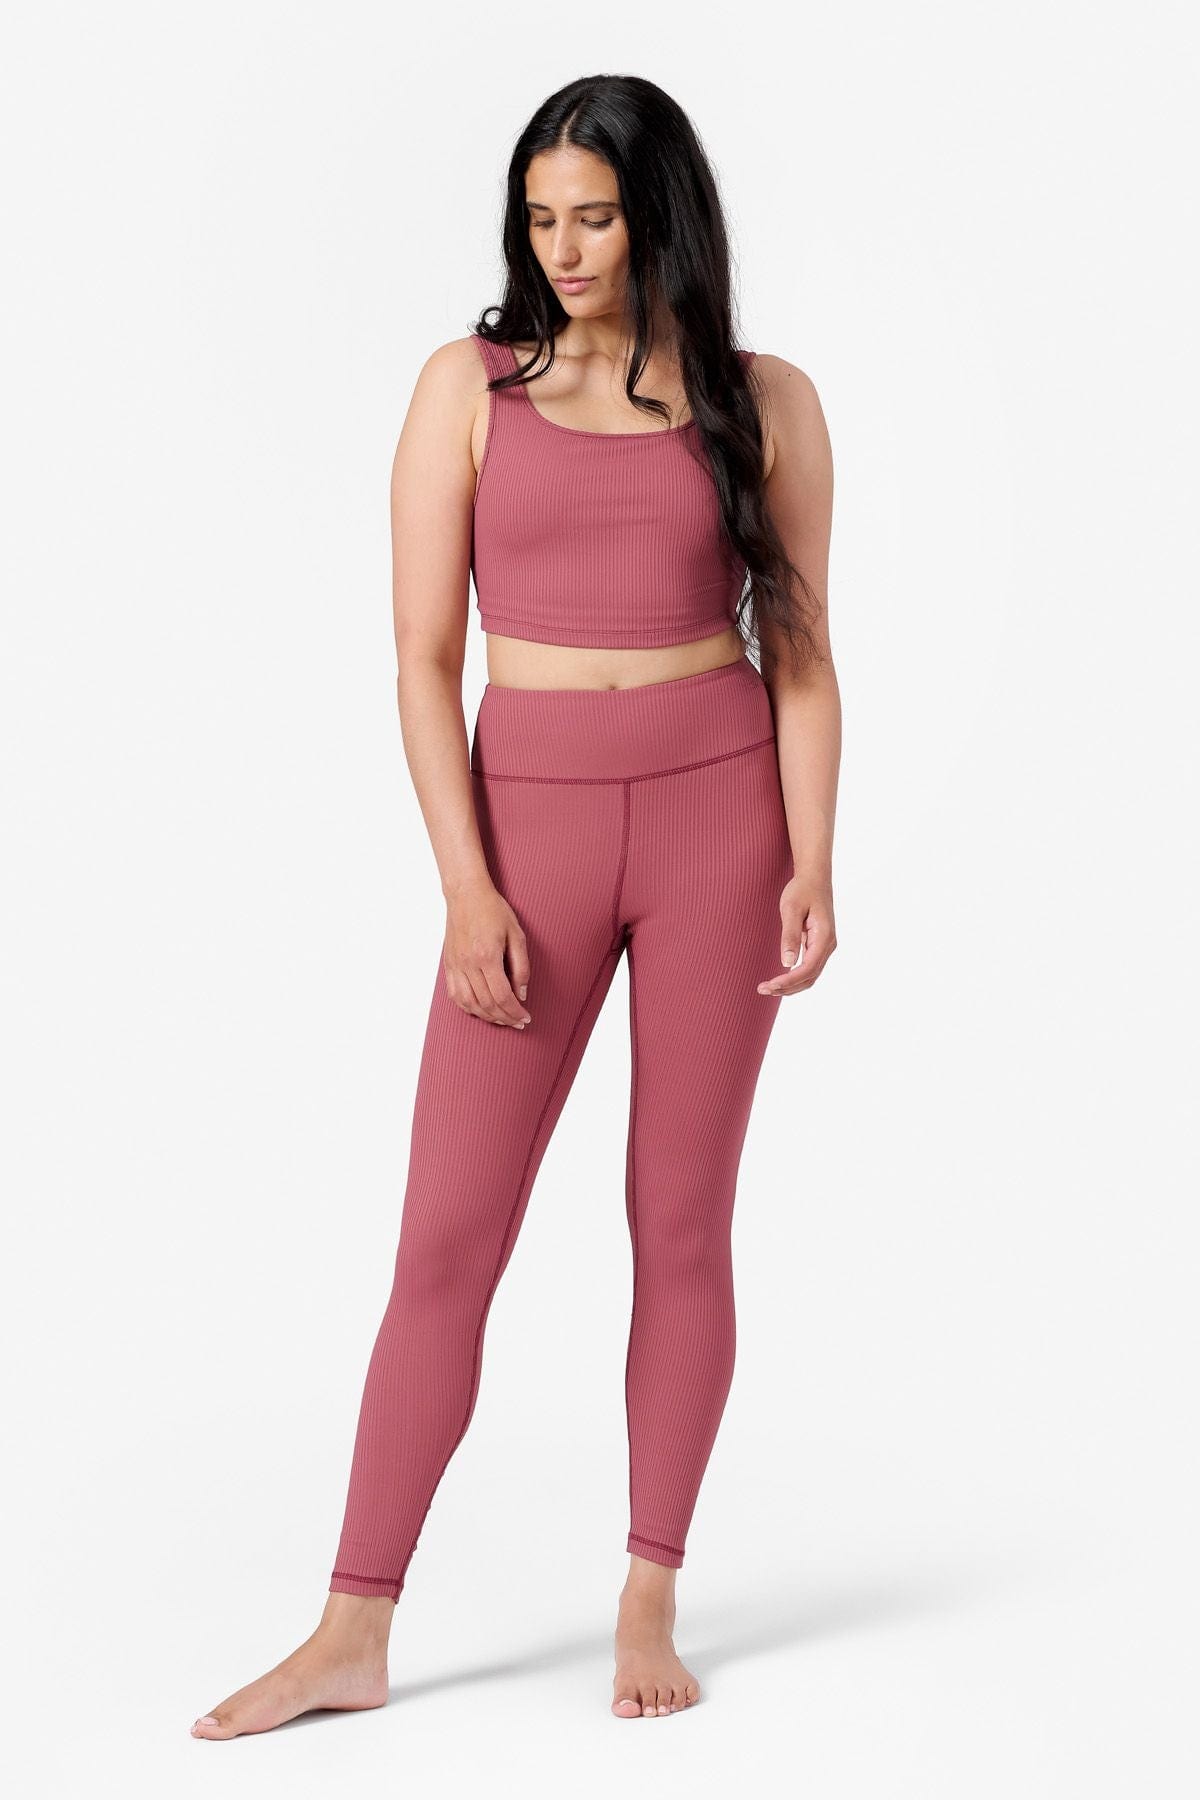 full length view of a woman wearing a matching pink ribbed yoga set with tank top and leggings